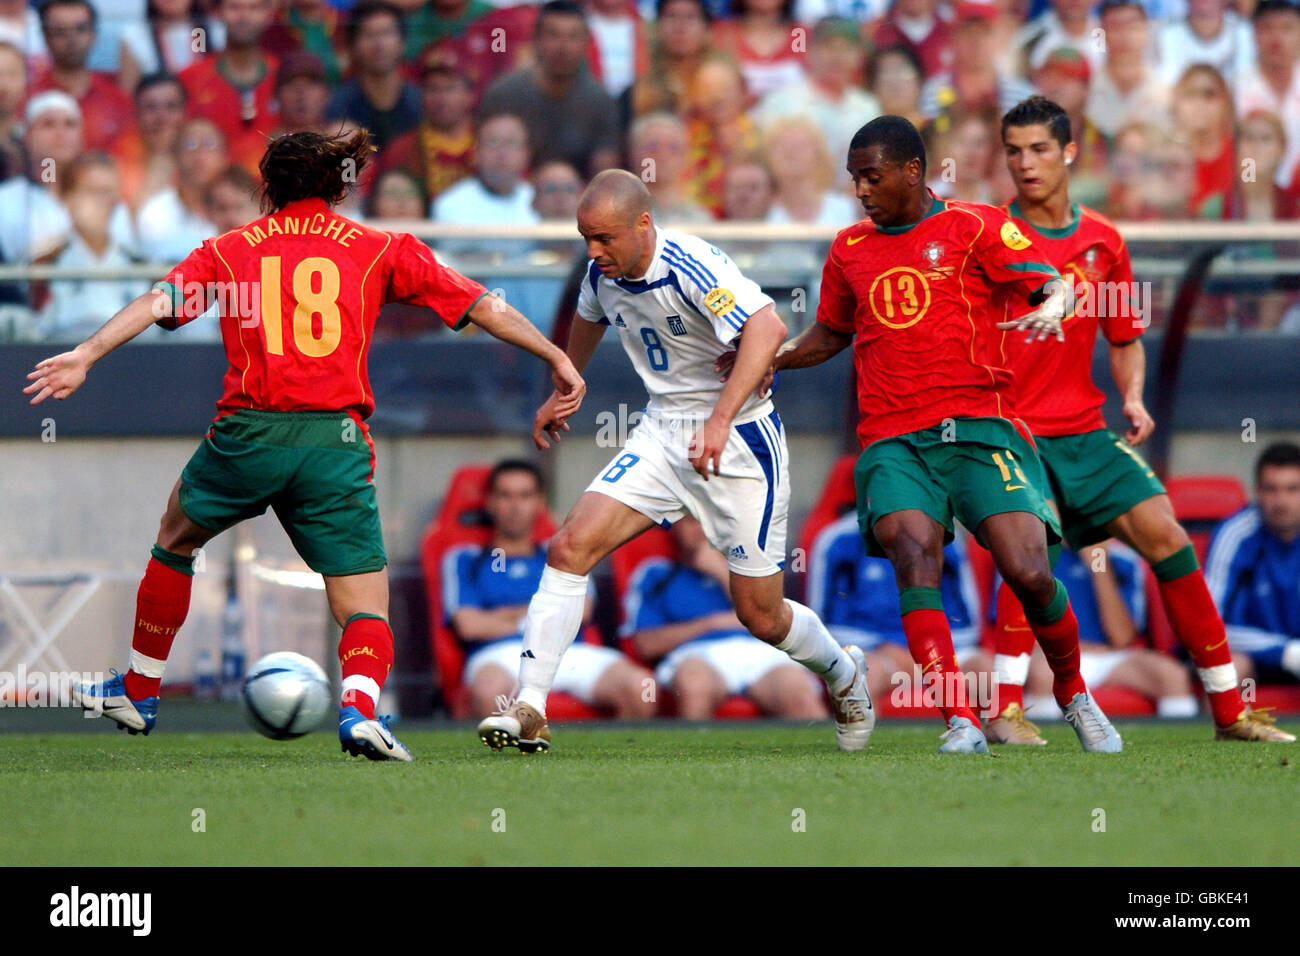 Soccer - UEFA European Championship 2004 - Final - Portugal v Greece. Greece's Stylianos Giannakopoulos takes on Portugal's Maniche (l) Miguel (second right) and Cristiano Ronaldo (r) Stock Photo